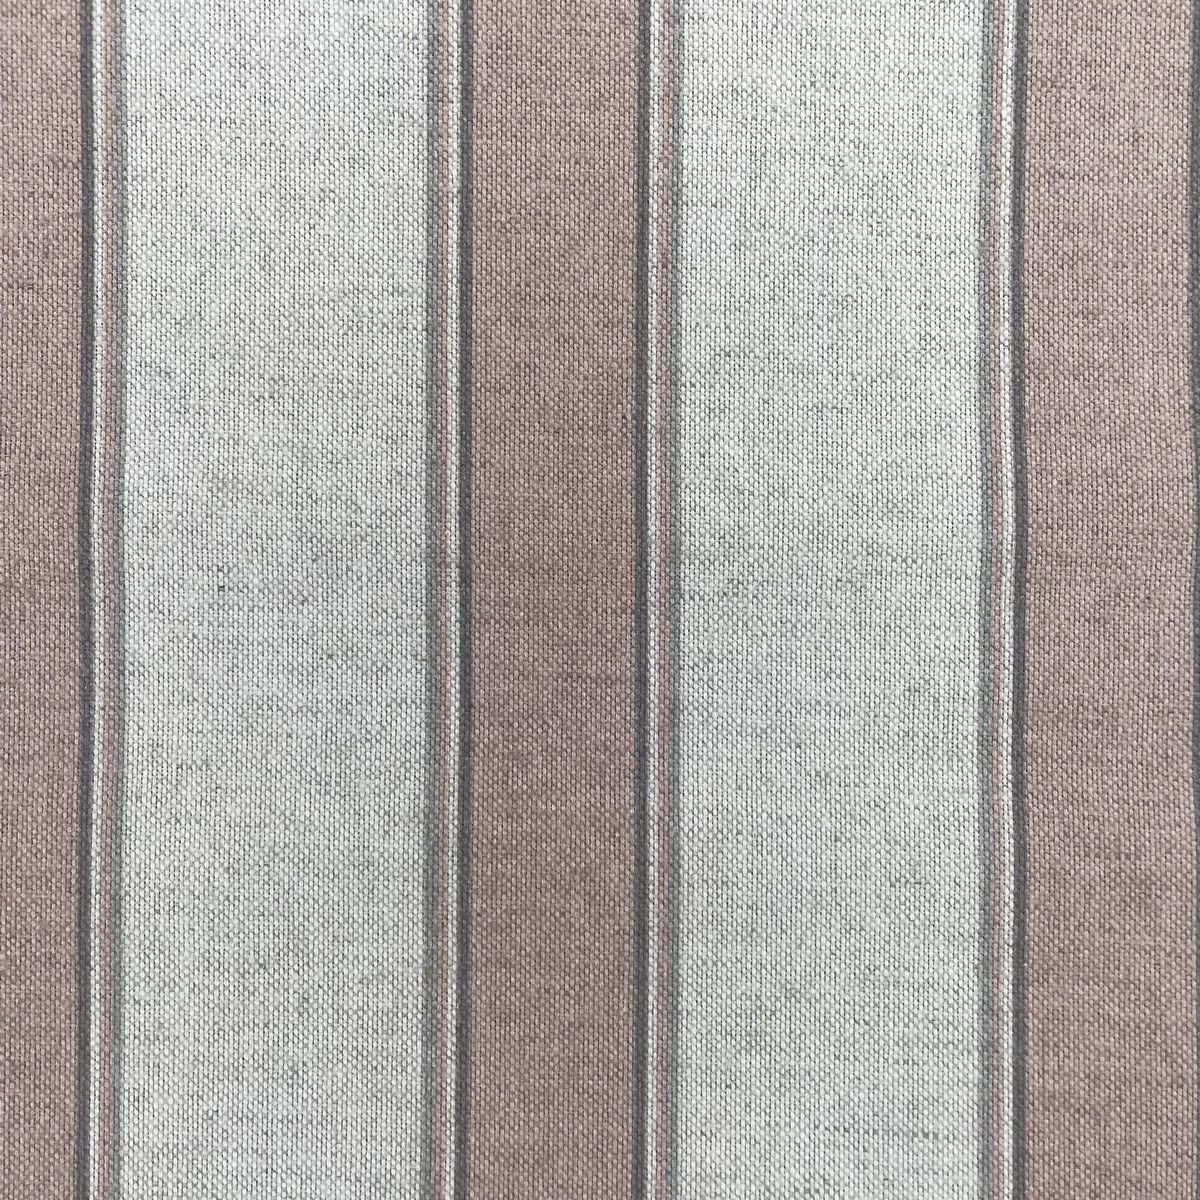 Willow Blush Fabric by Chatham Glyn